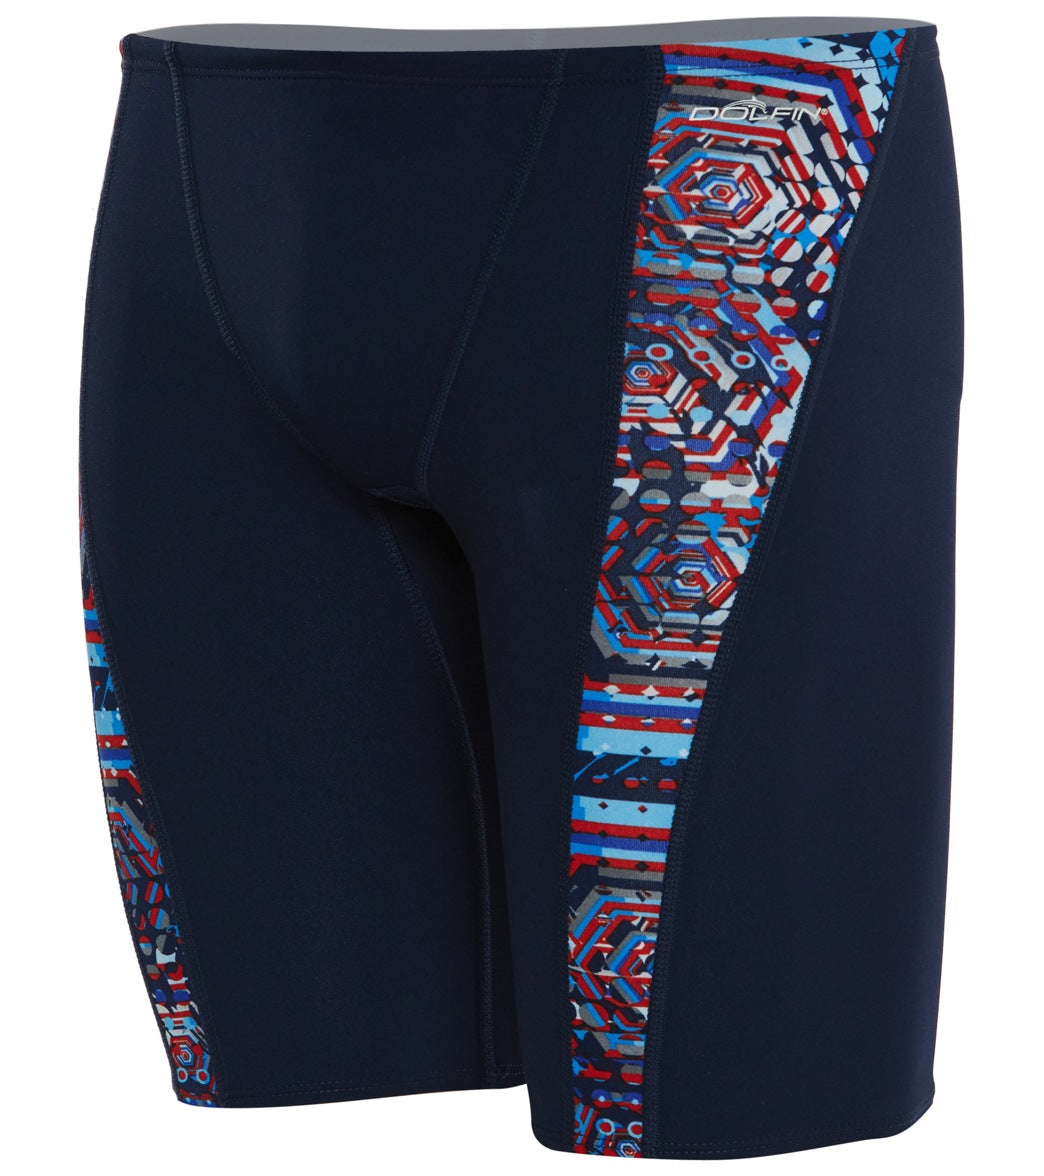 Dolfin Reliance Men's Hive Spliced Jammer Swimsuit - Red/White/Blue 24 Polyester - Swimoutlet.com